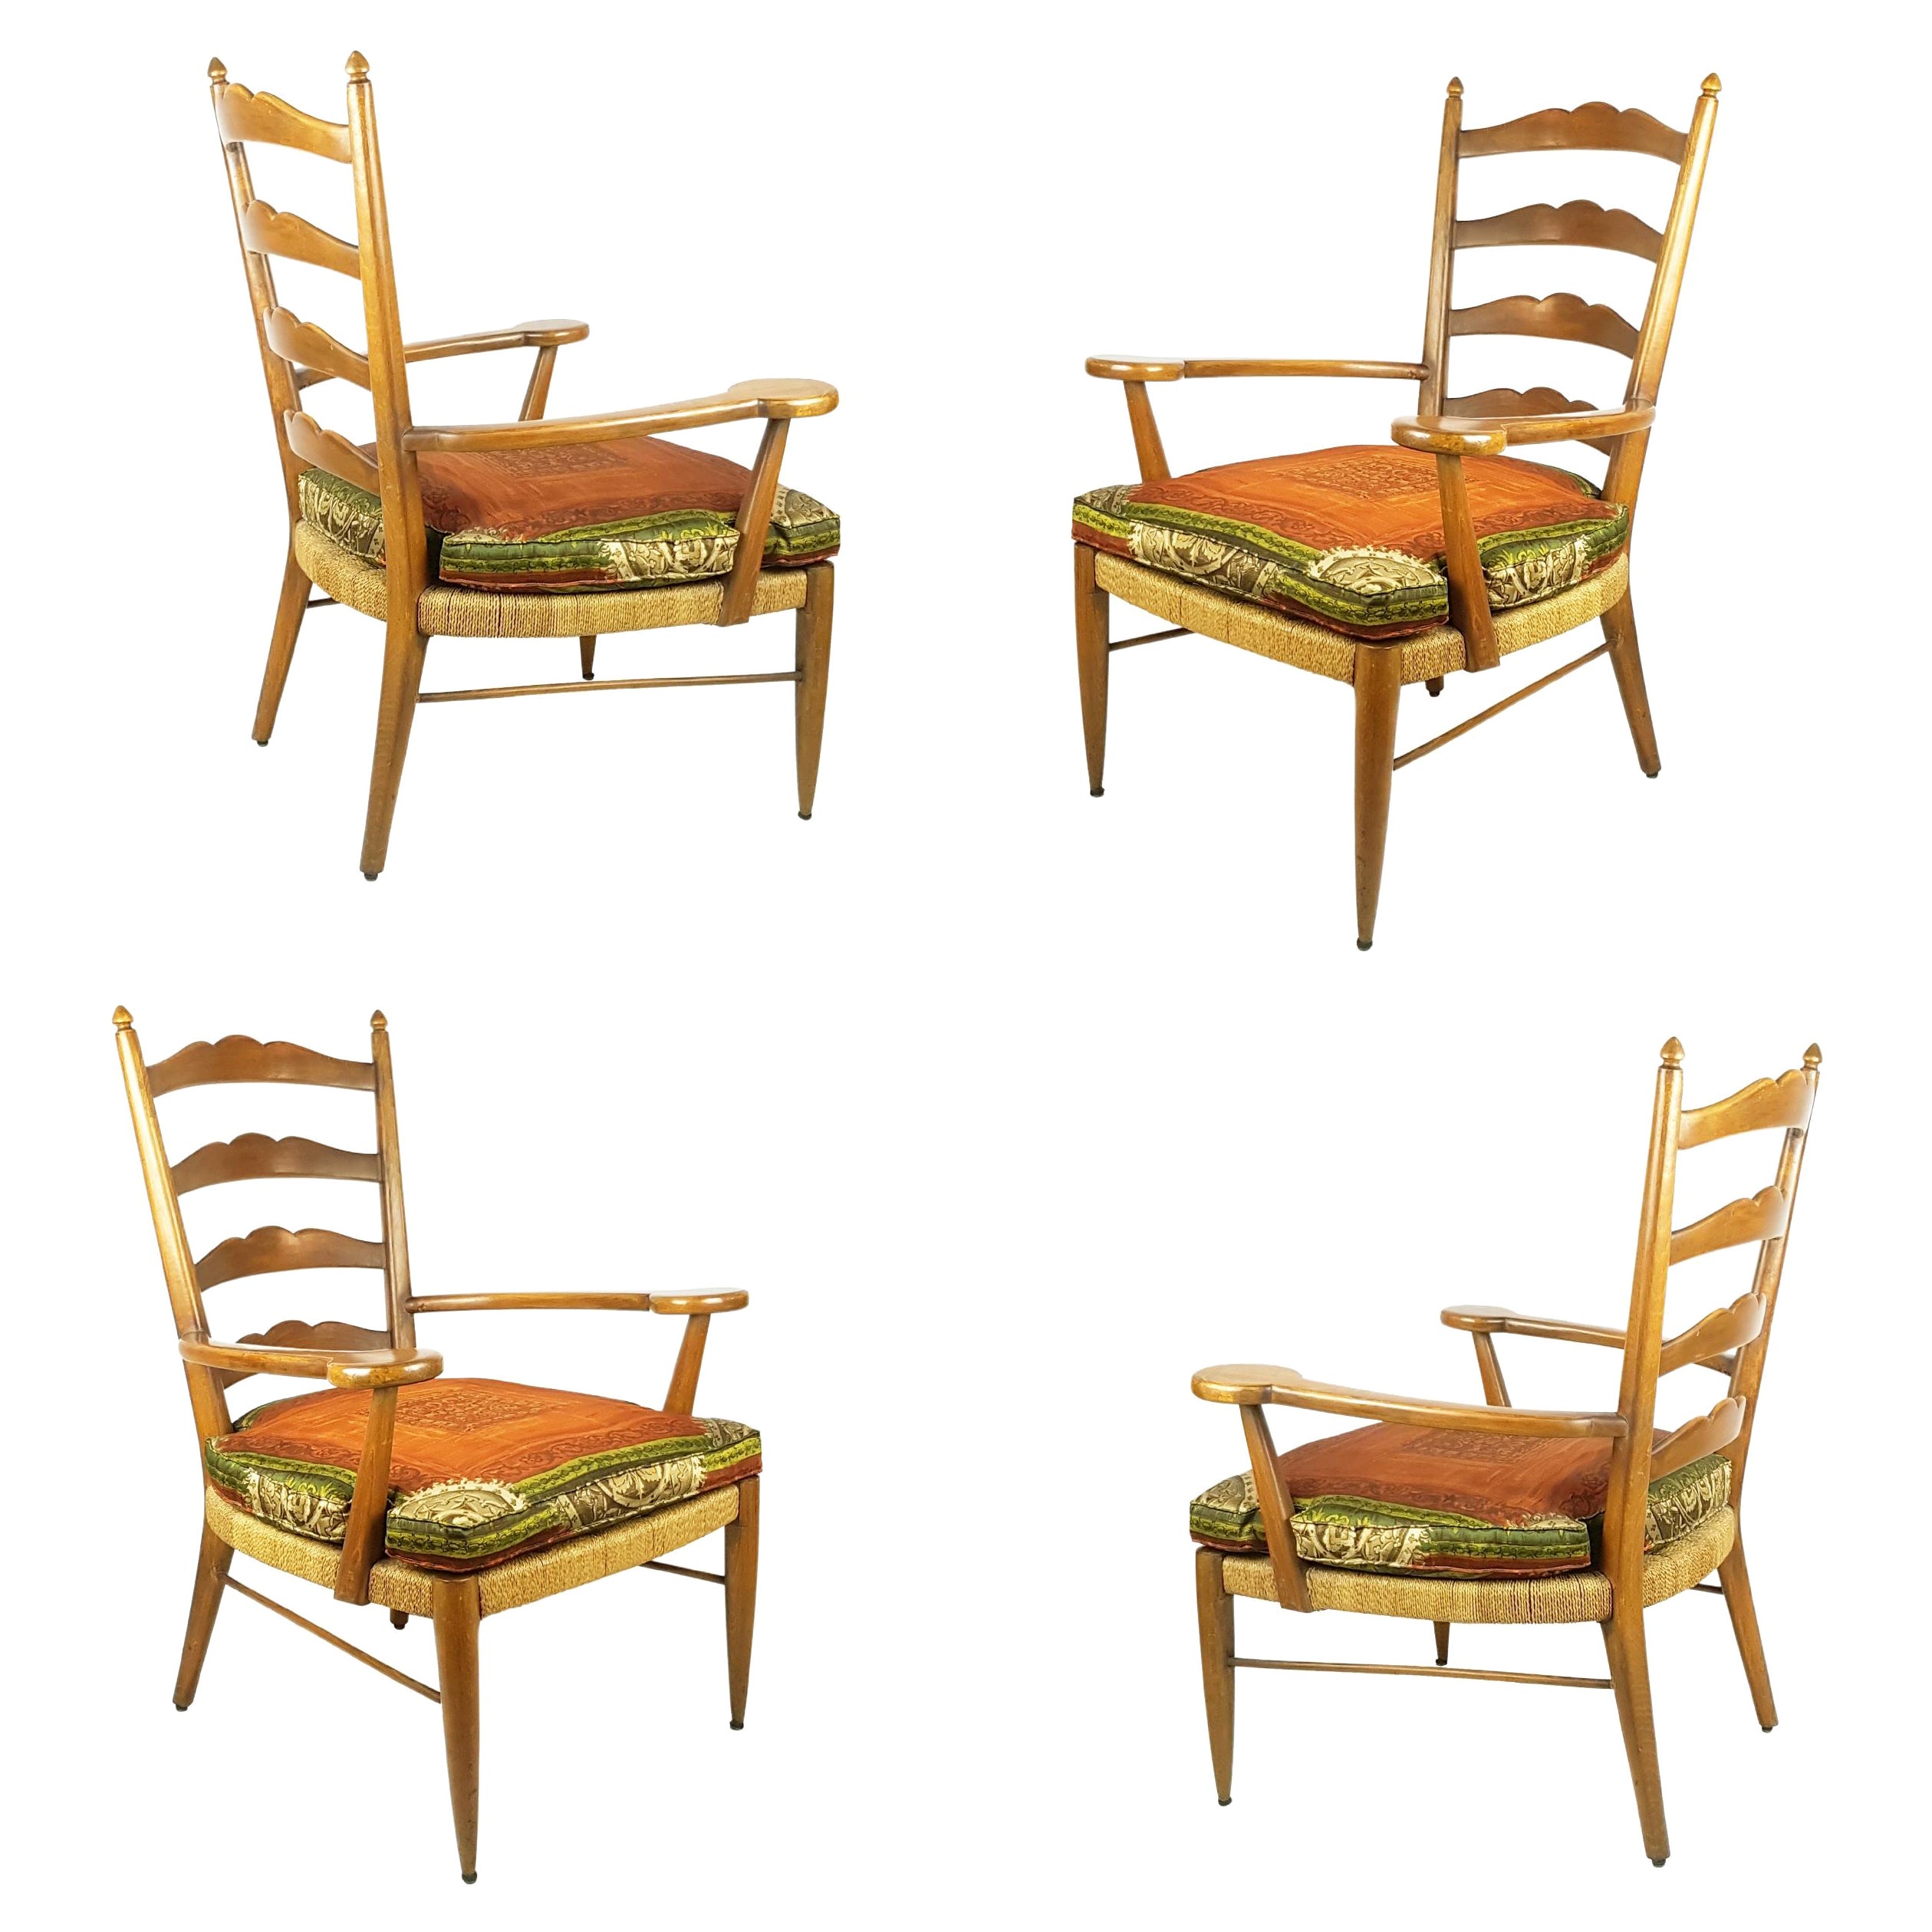 Rare Pair of Wood & Rope 1949 Armchairs by Ico Parisi